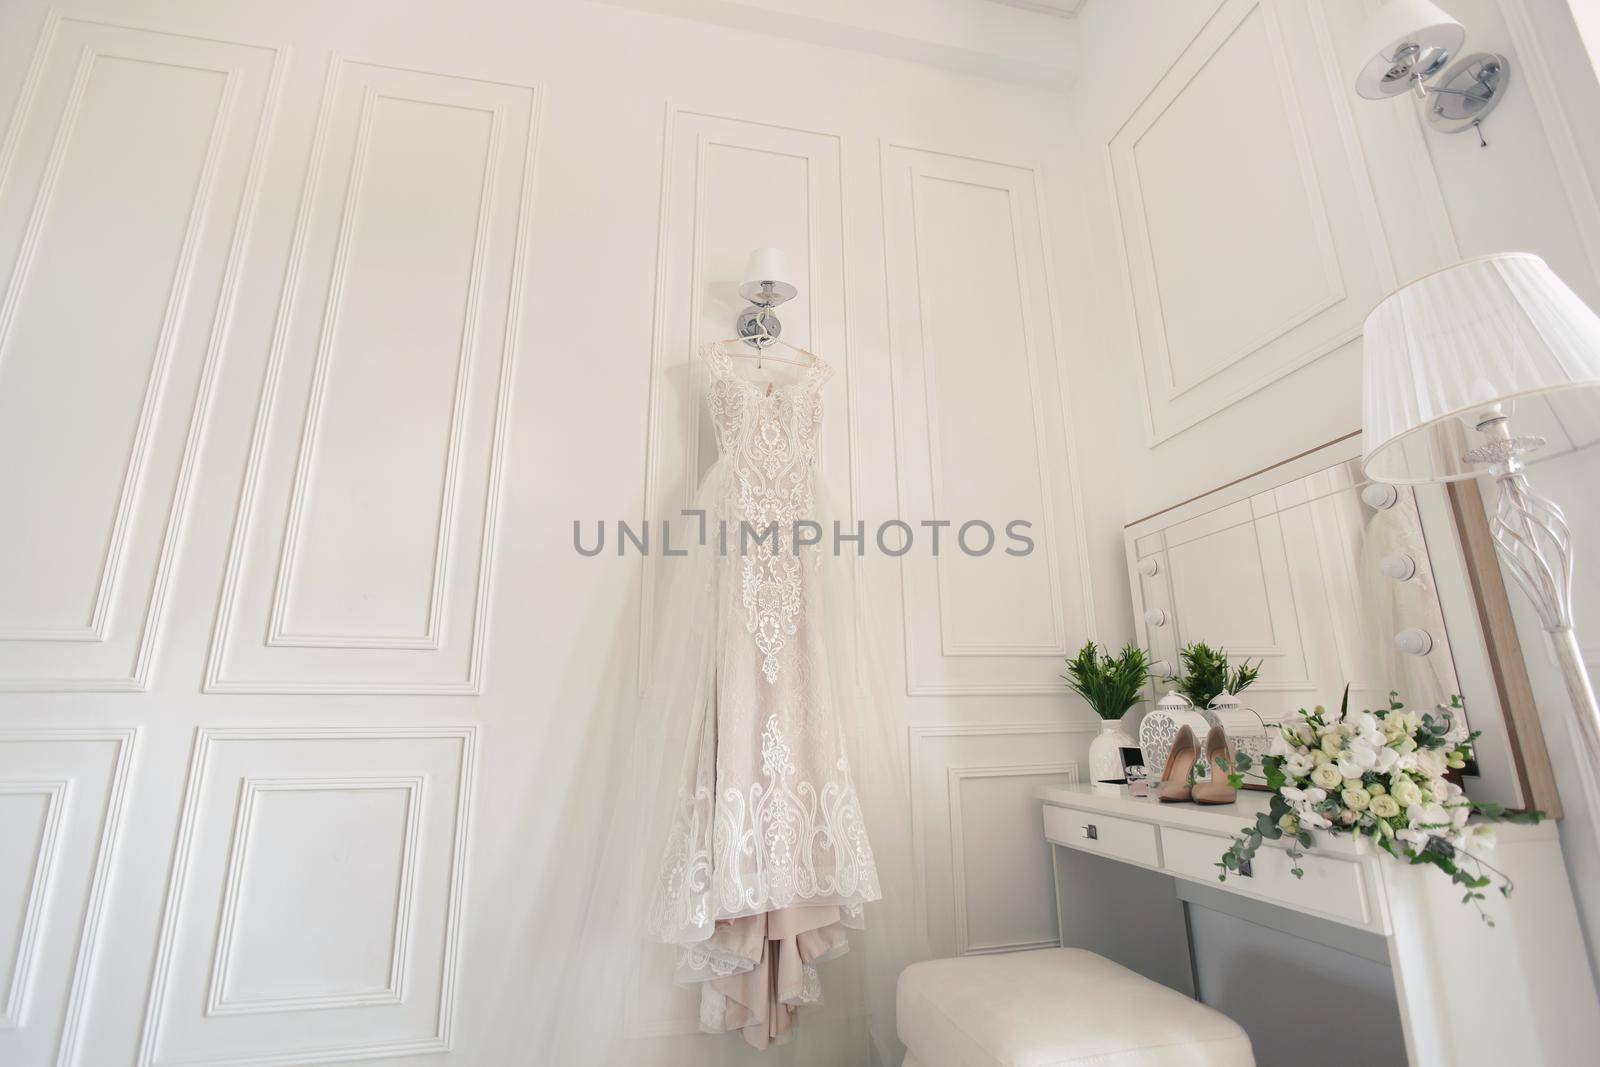 Elegant wedding white dress hanging on a wall during a wedding preparation. Bride's morning. Before ceremony. by StudioPeace